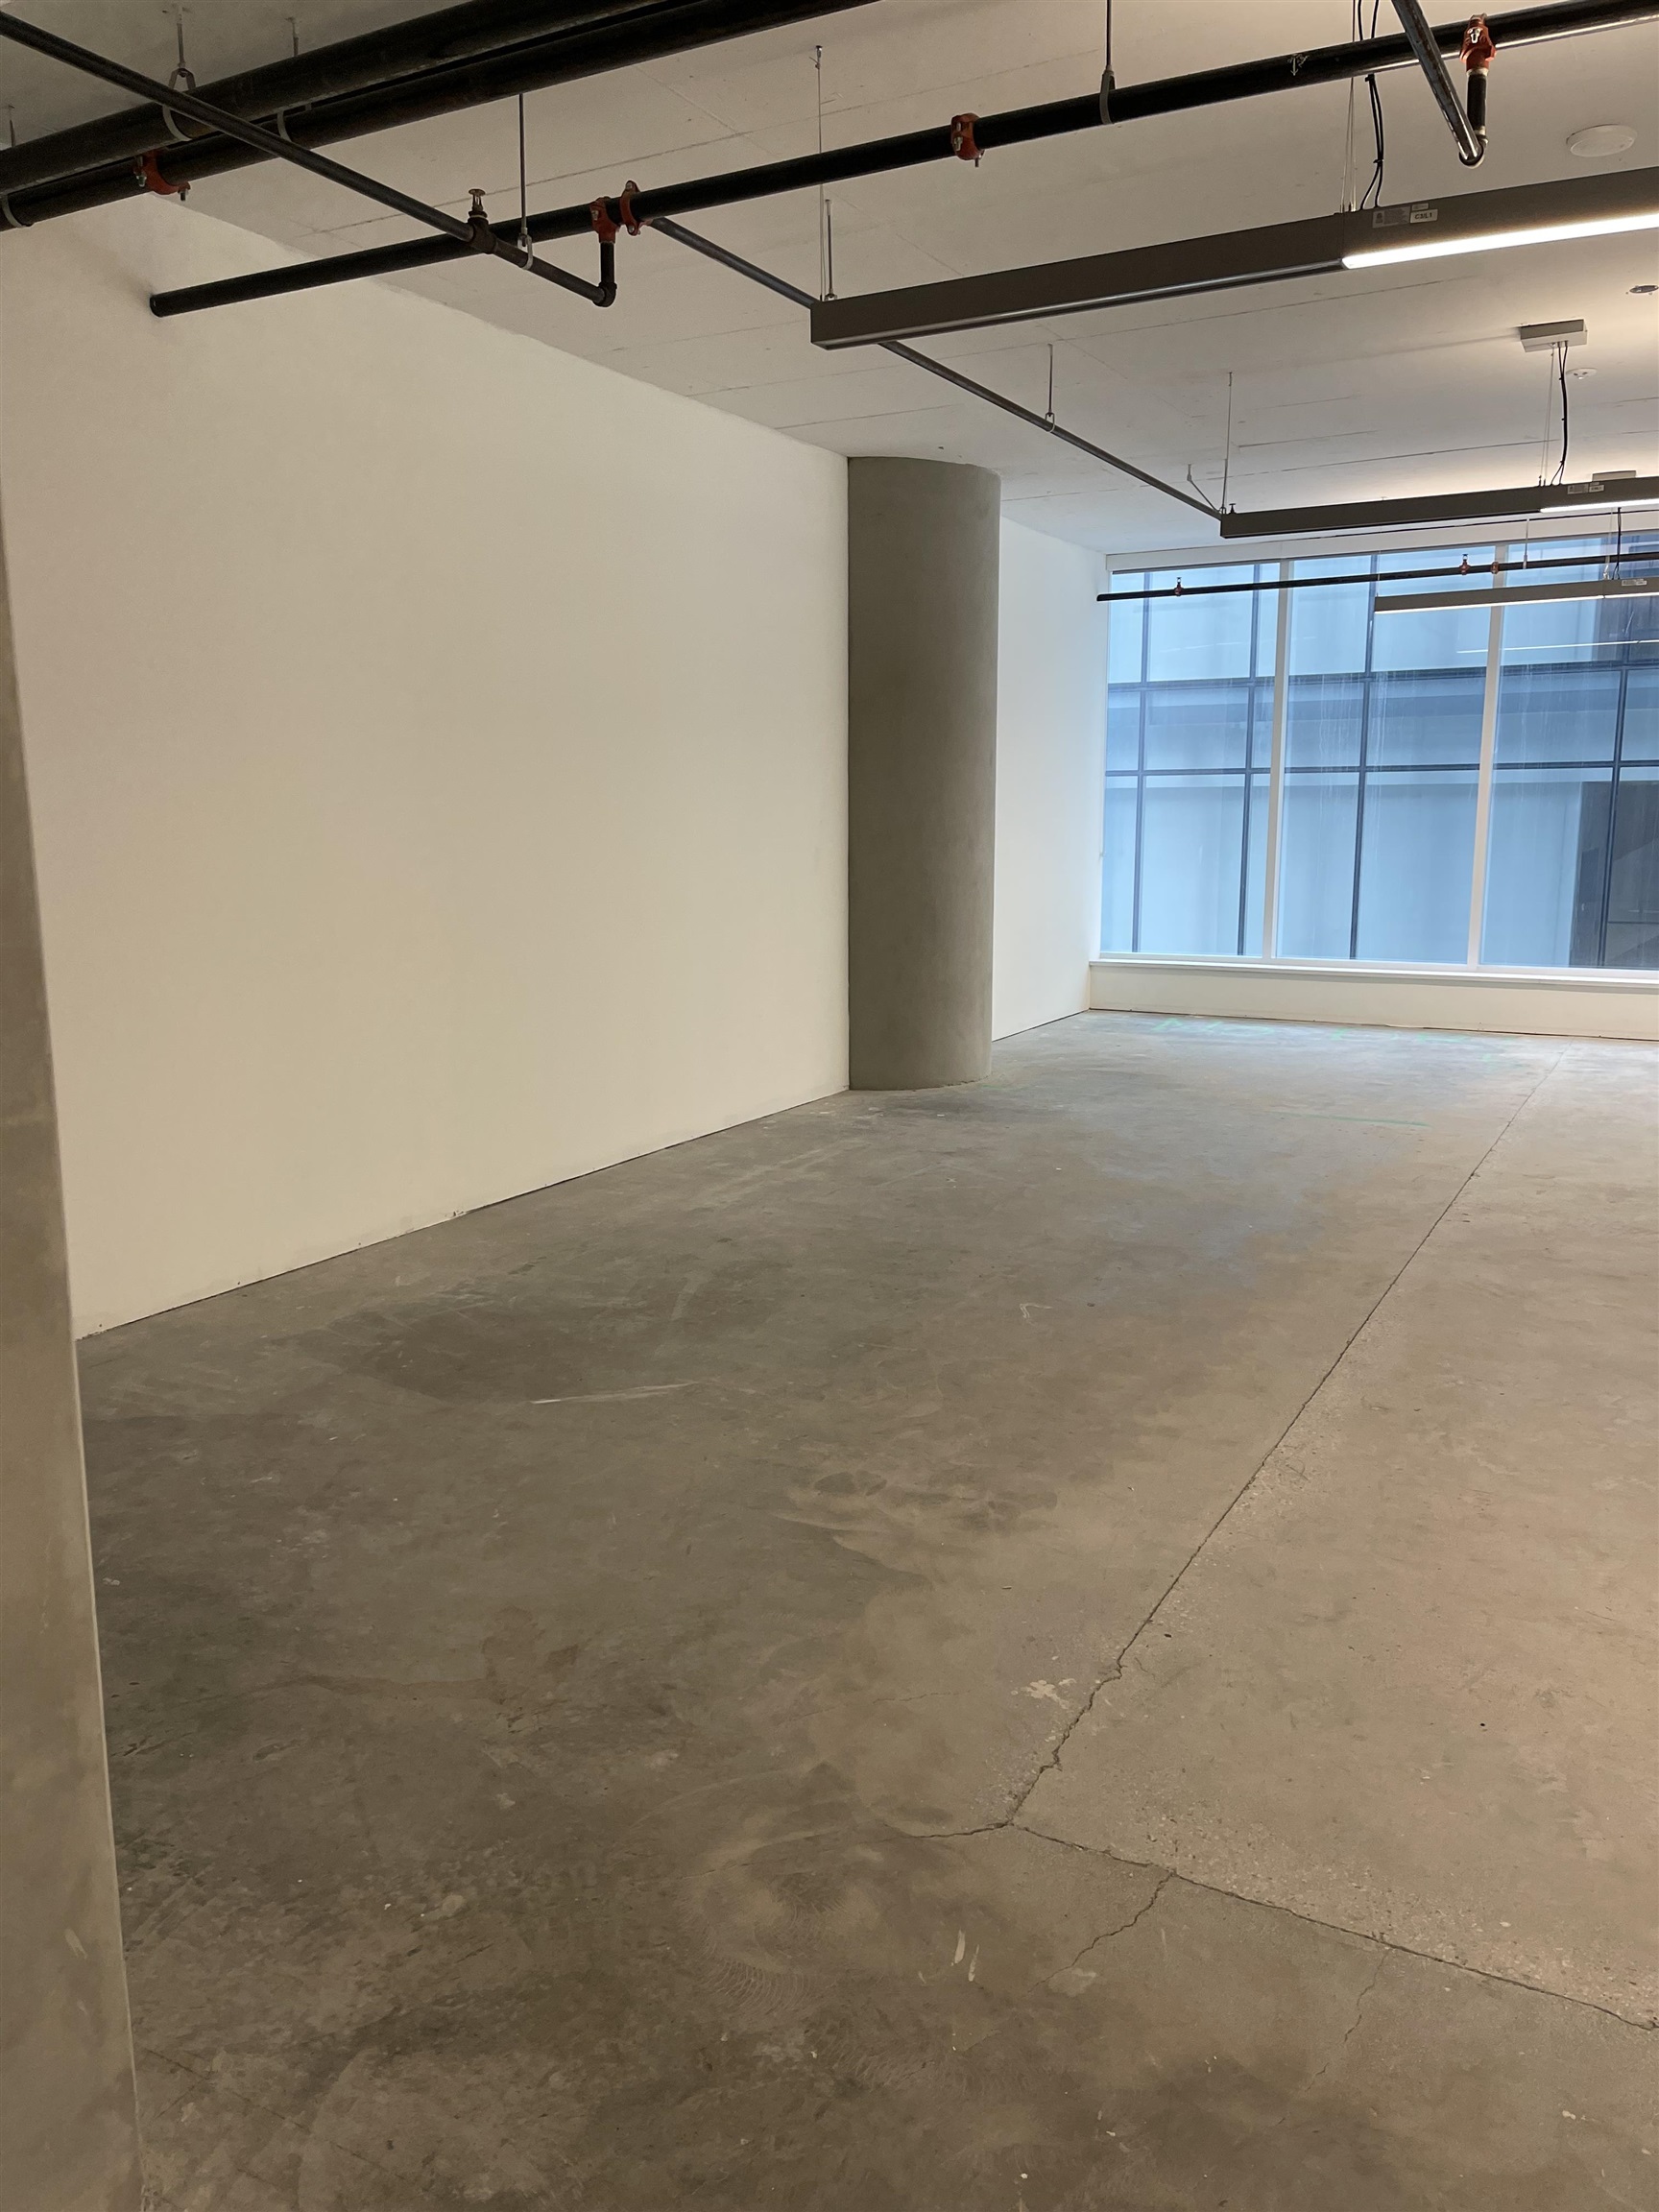 502-1281 HORNBY STREET, Vancouver, British Columbia, ,Office,For Lease,C8054219